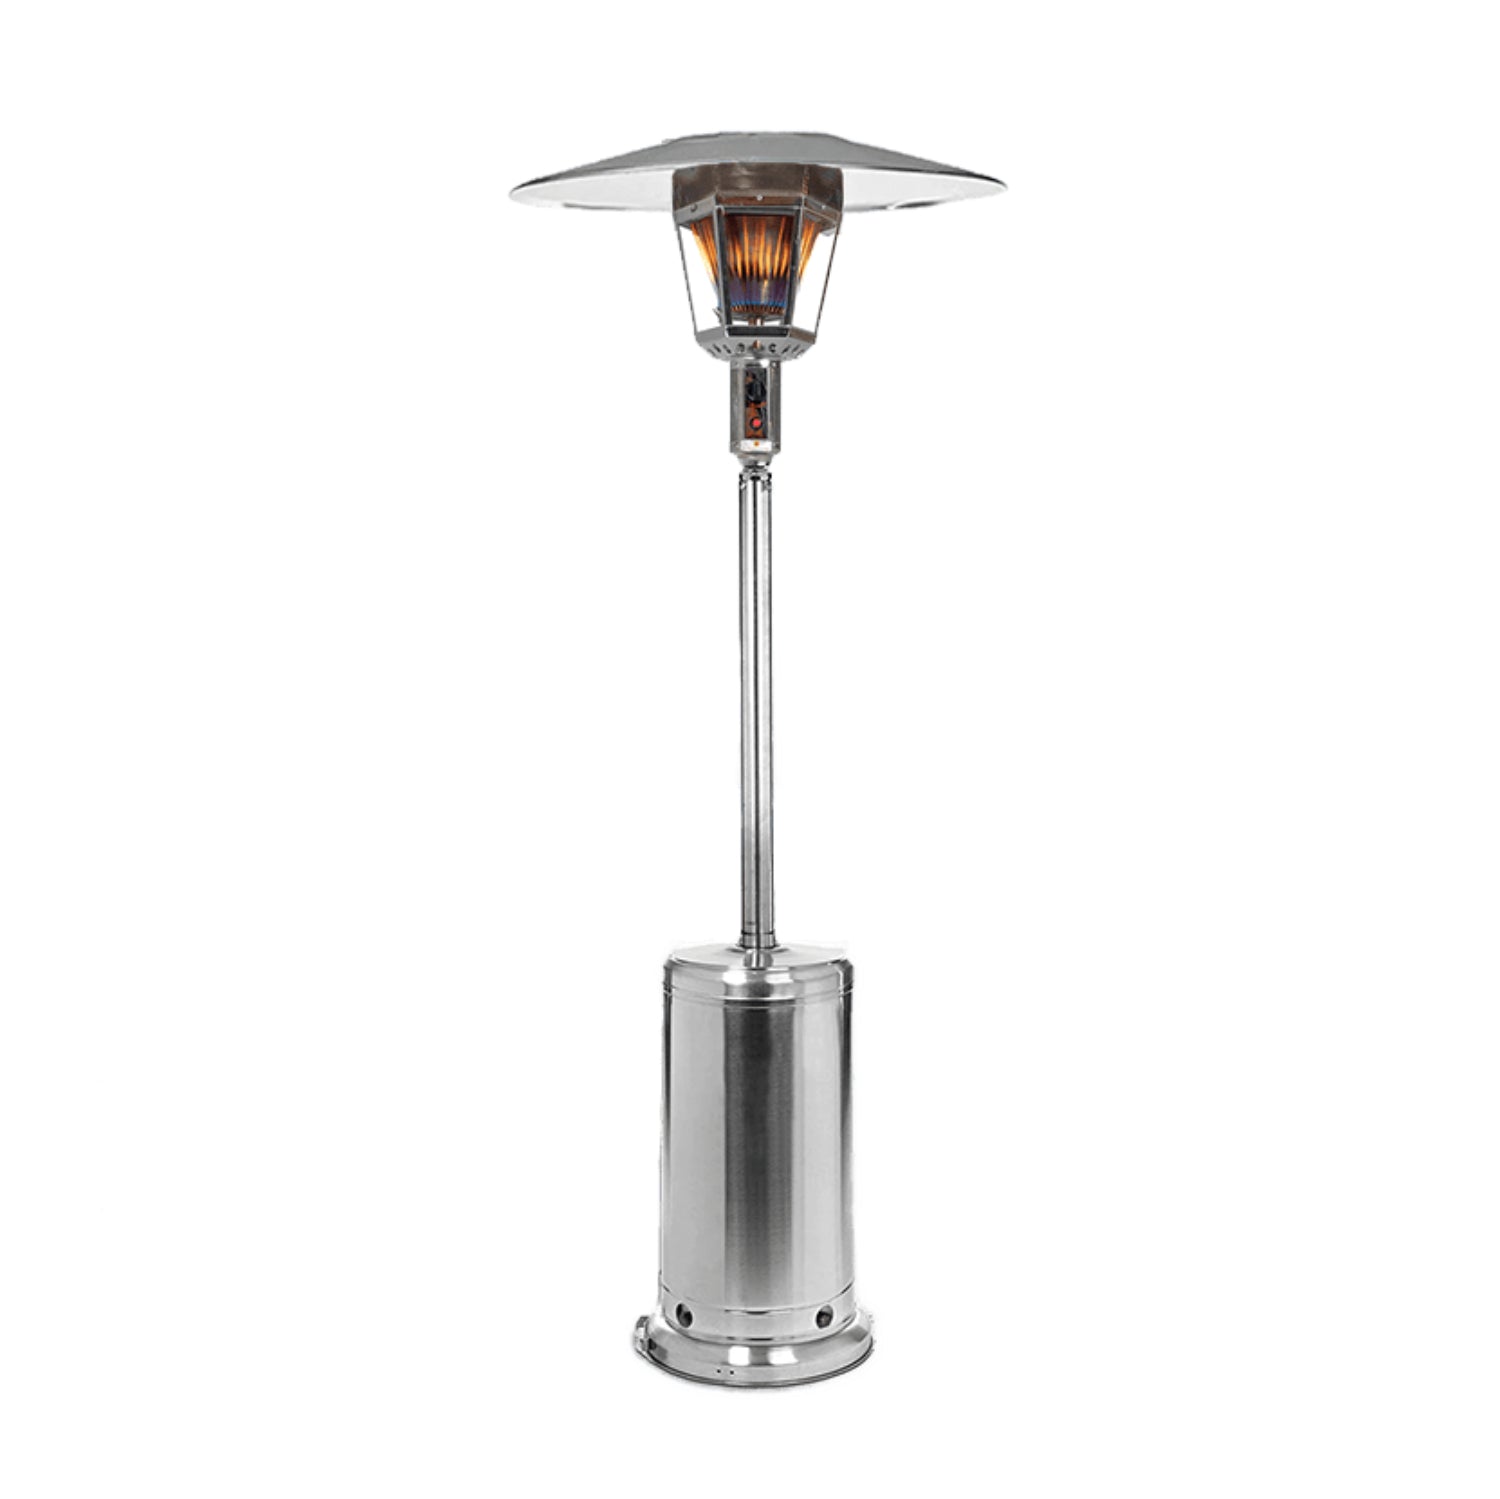 RADtec 96" Real Flame Propane Patio Heater - Stainless Steel Finish--Outdoor Direct